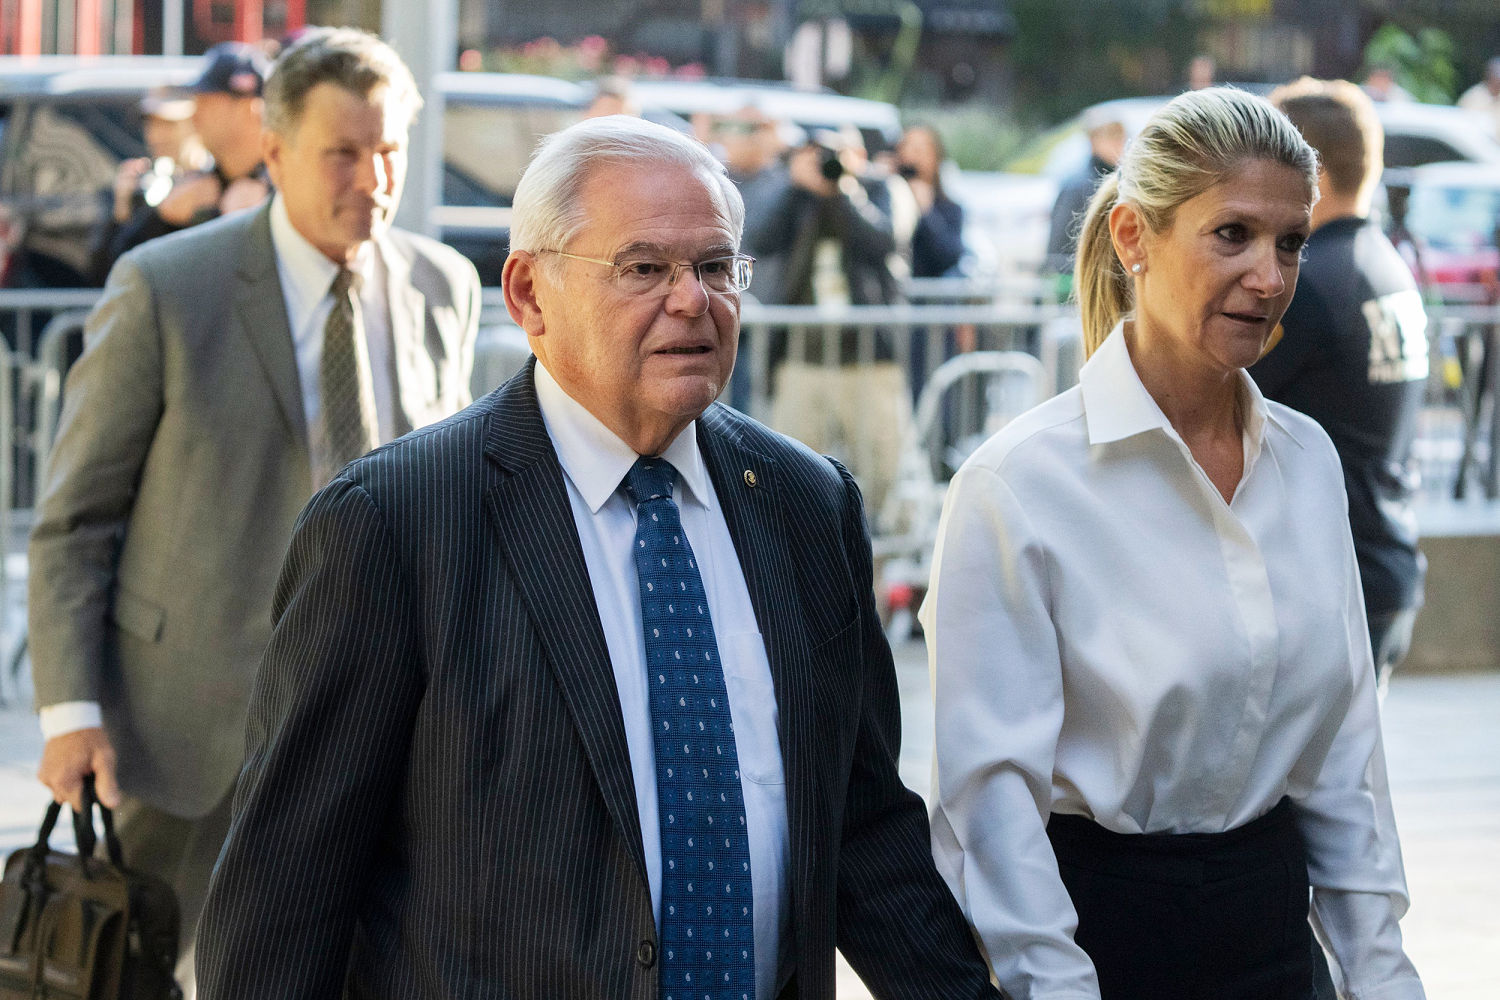 Sen. Bob Menendez's wife, who faces bribery charges with him, has breast cancer